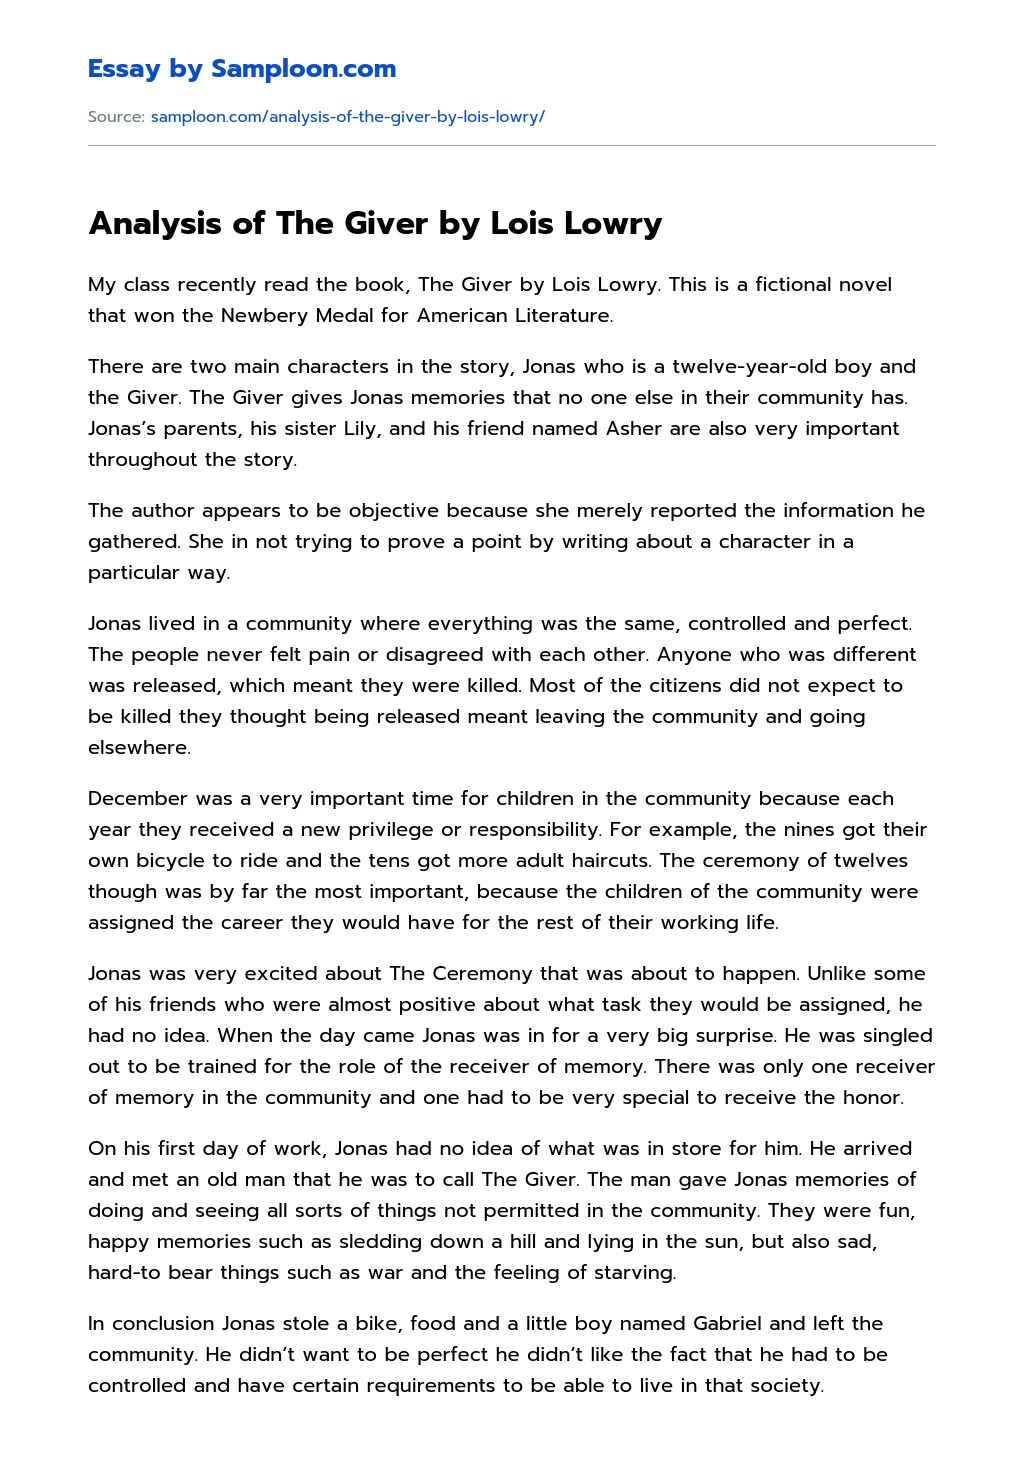 Analysis of The Giver by Lois Lowry essay